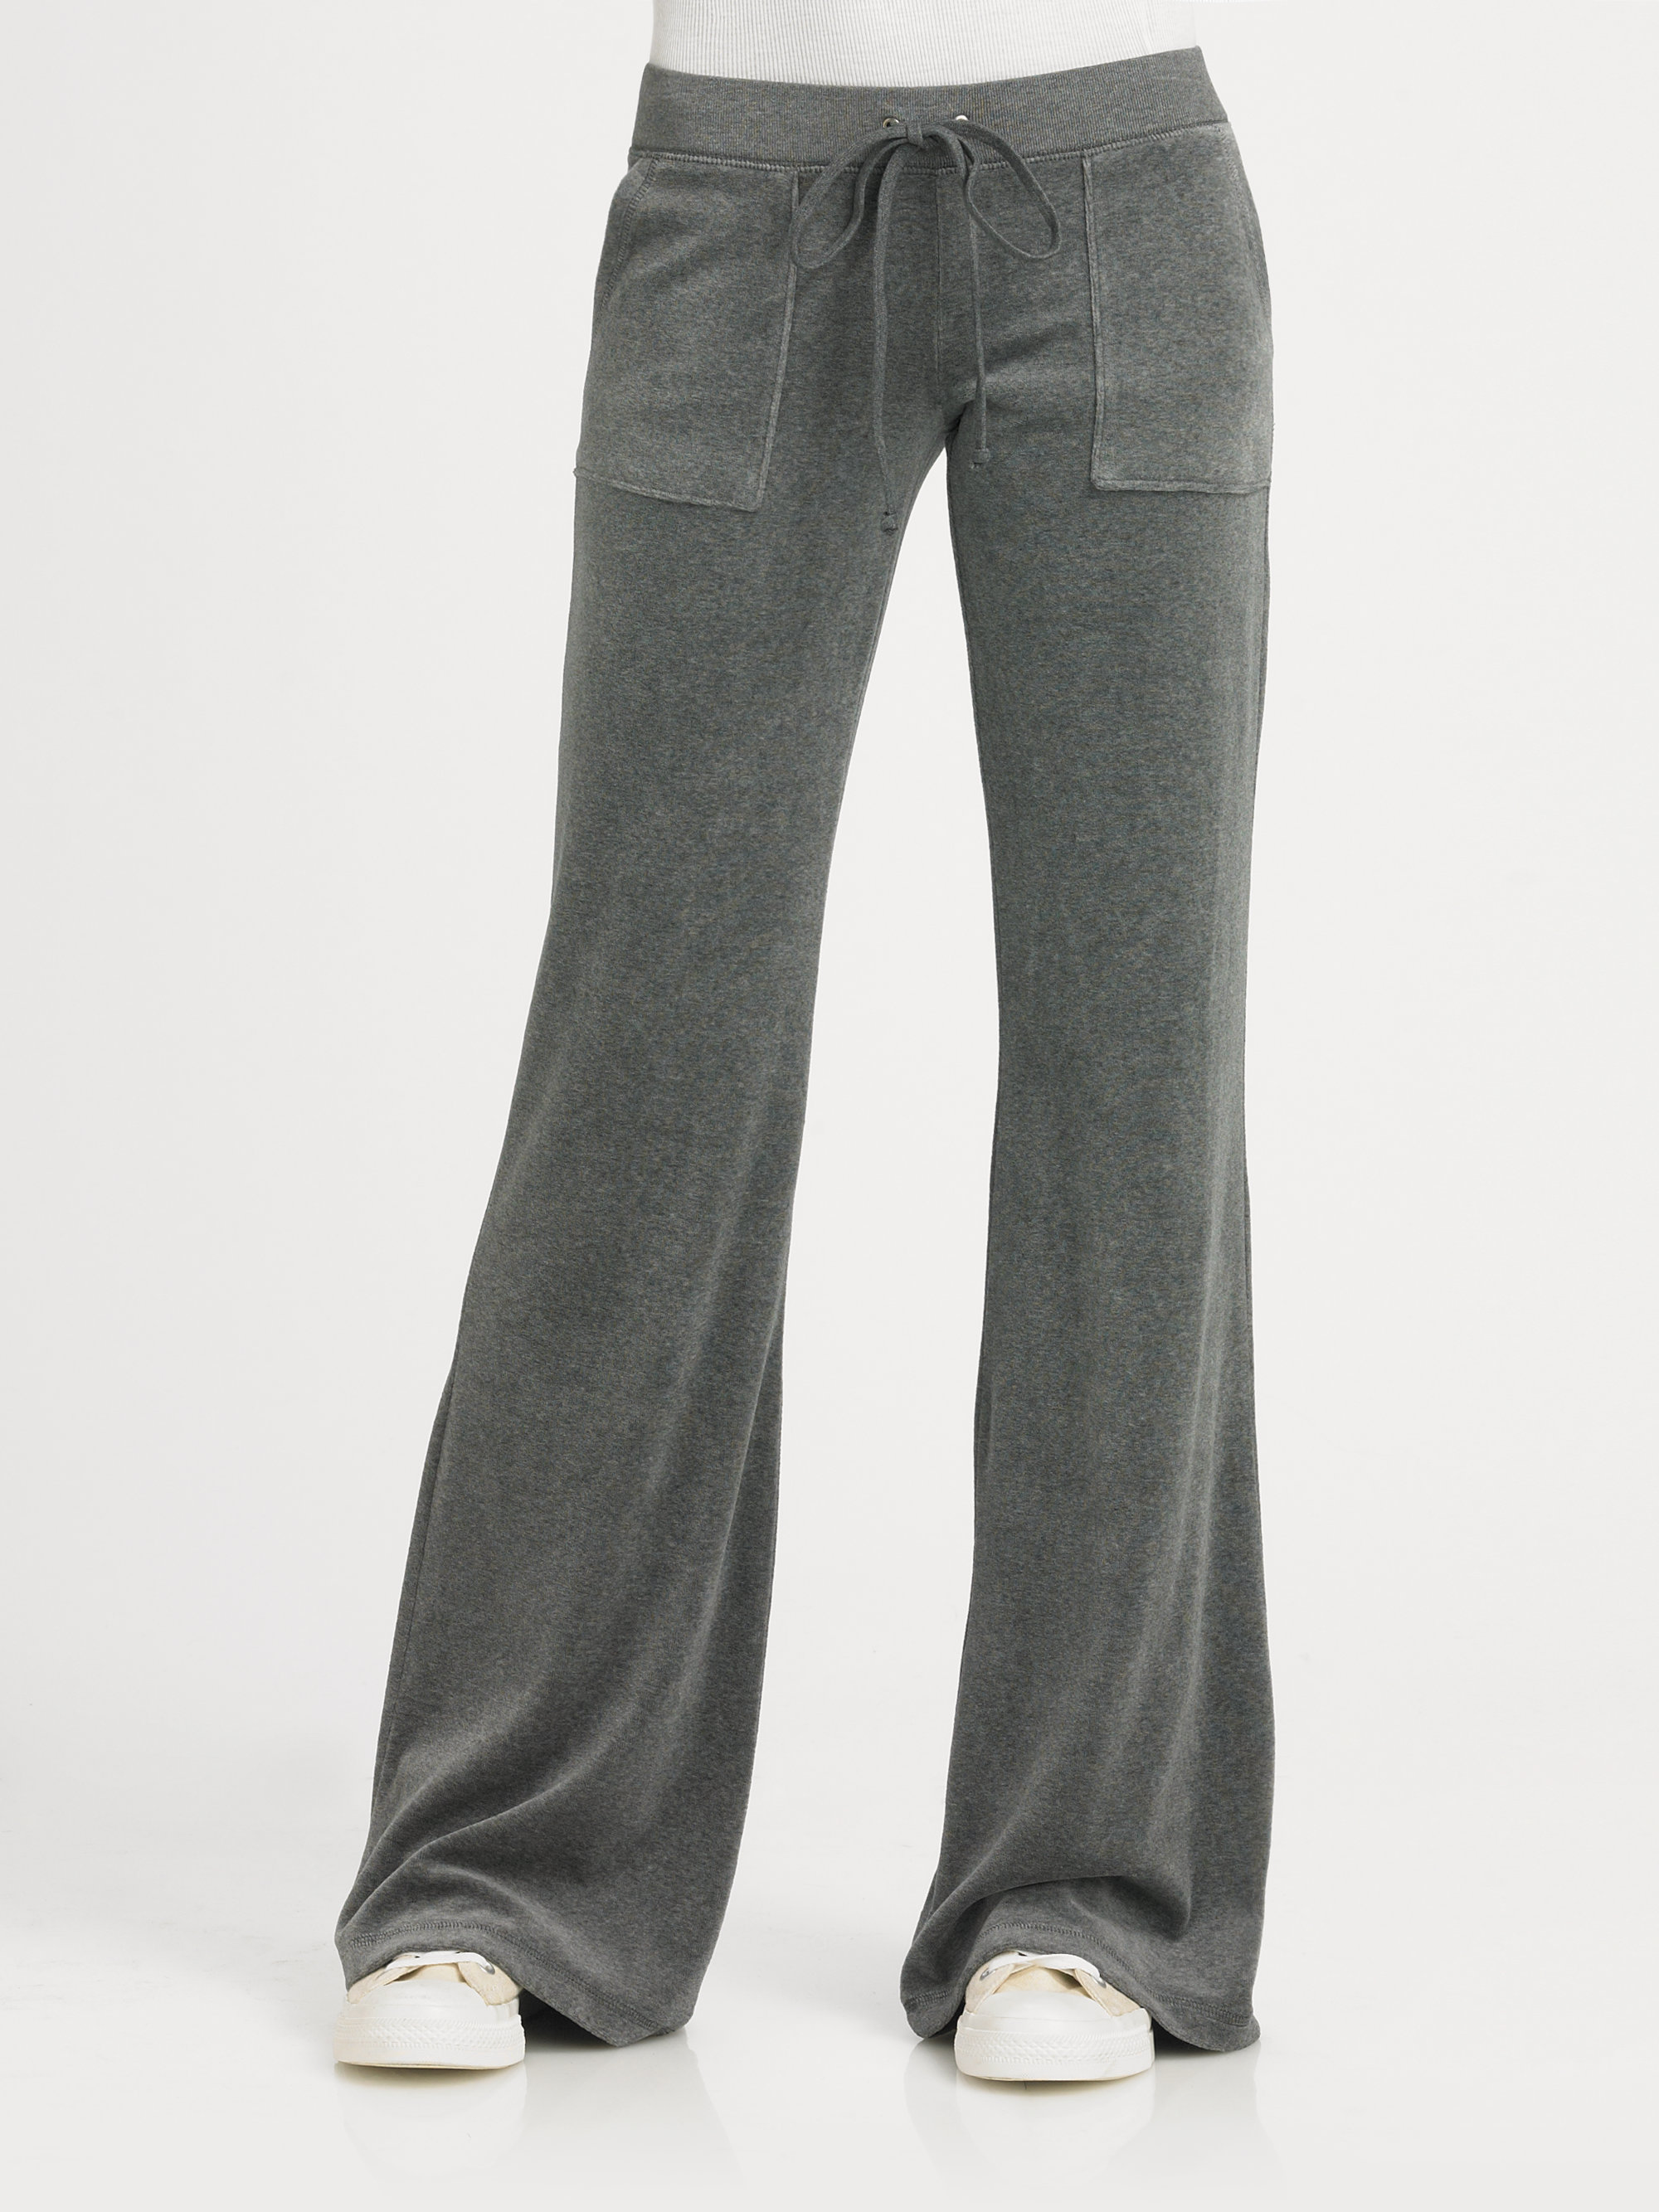 Juicy Couture Snap Pocket Velour Pant in Gray | Lyst